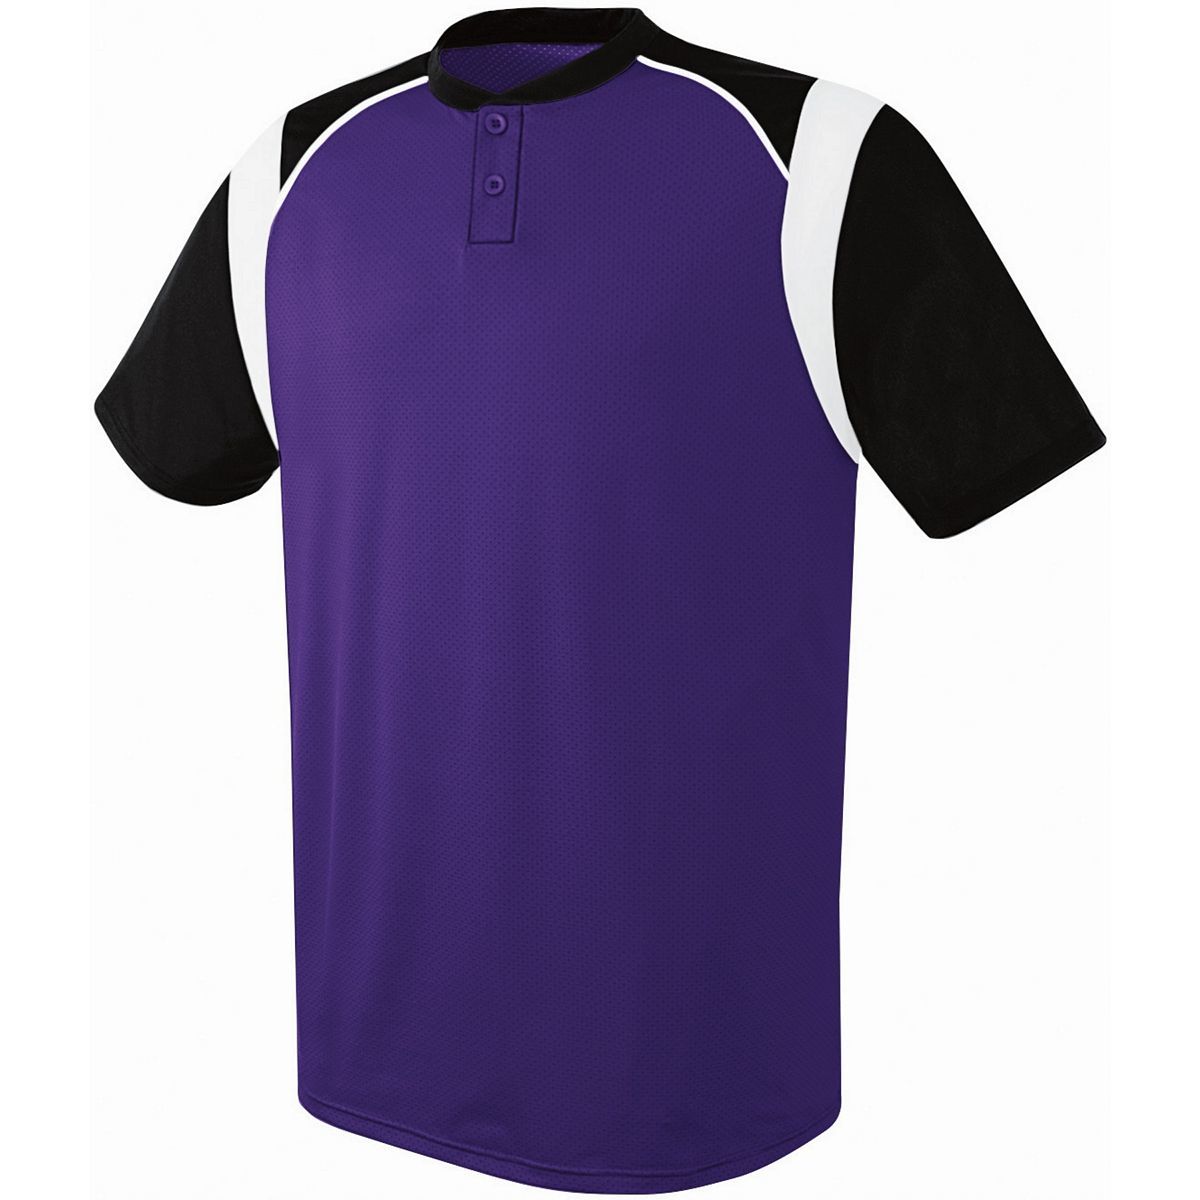 Augusta Sportswear Wildcard Two-Button Jersey in Purple/Black/White  -Part of the Adult, Adult-Jersey, Augusta-Products, Baseball, Shirts, All-Sports, All-Sports-1 product lines at KanaleyCreations.com